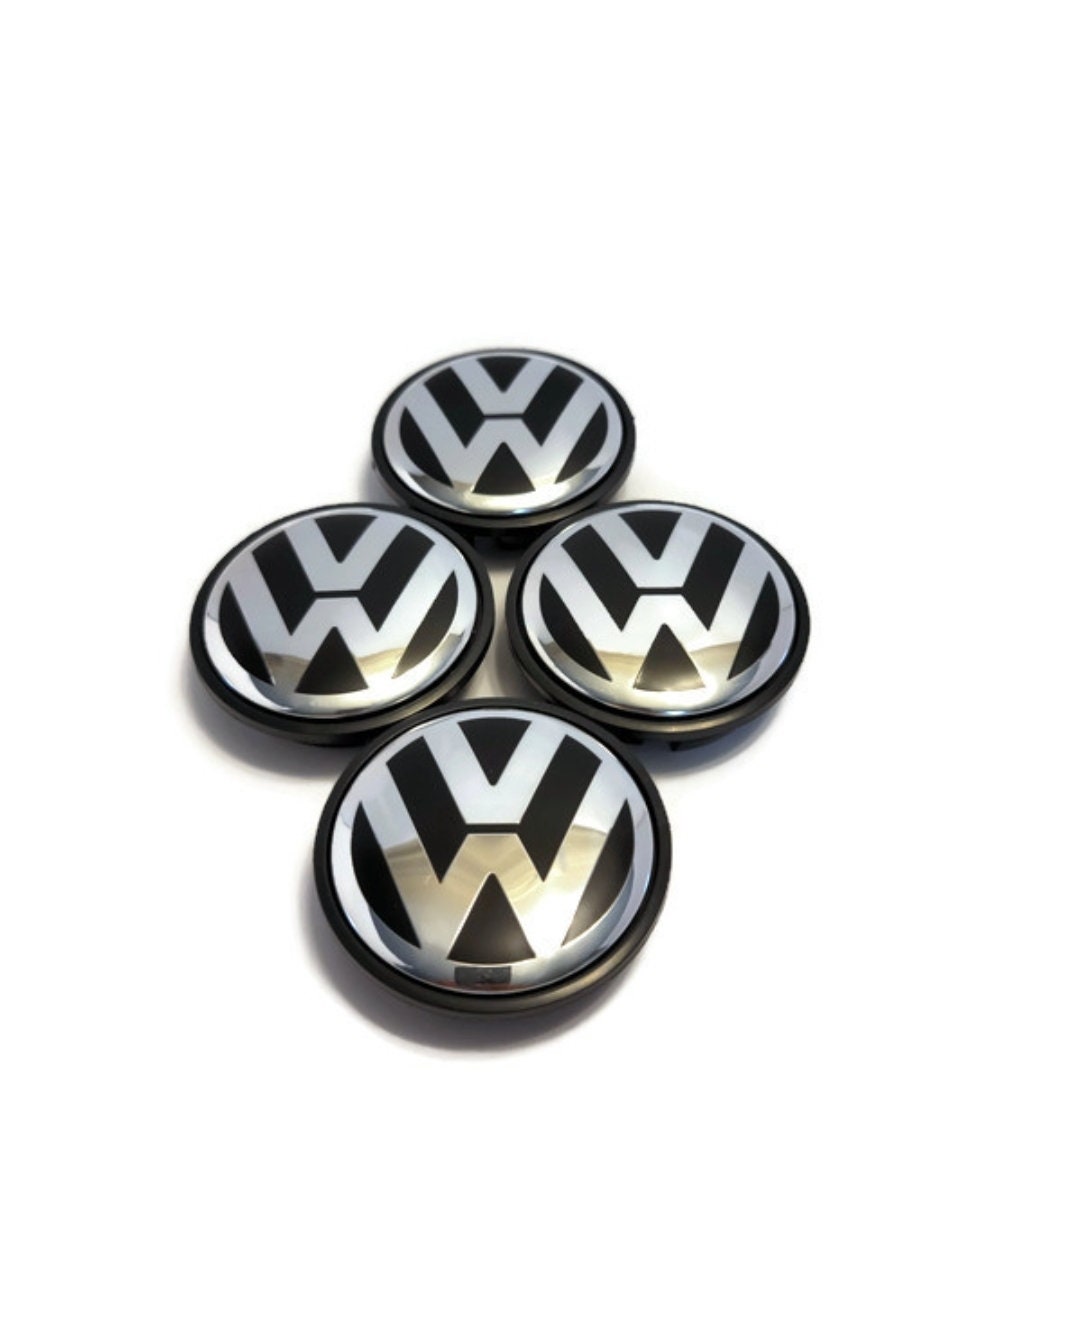 FREE GIFT #G SET OF 4 16" WHEEL TRIMS,RIMS,CAPS TO FIT VW T5 CARAVELLE 